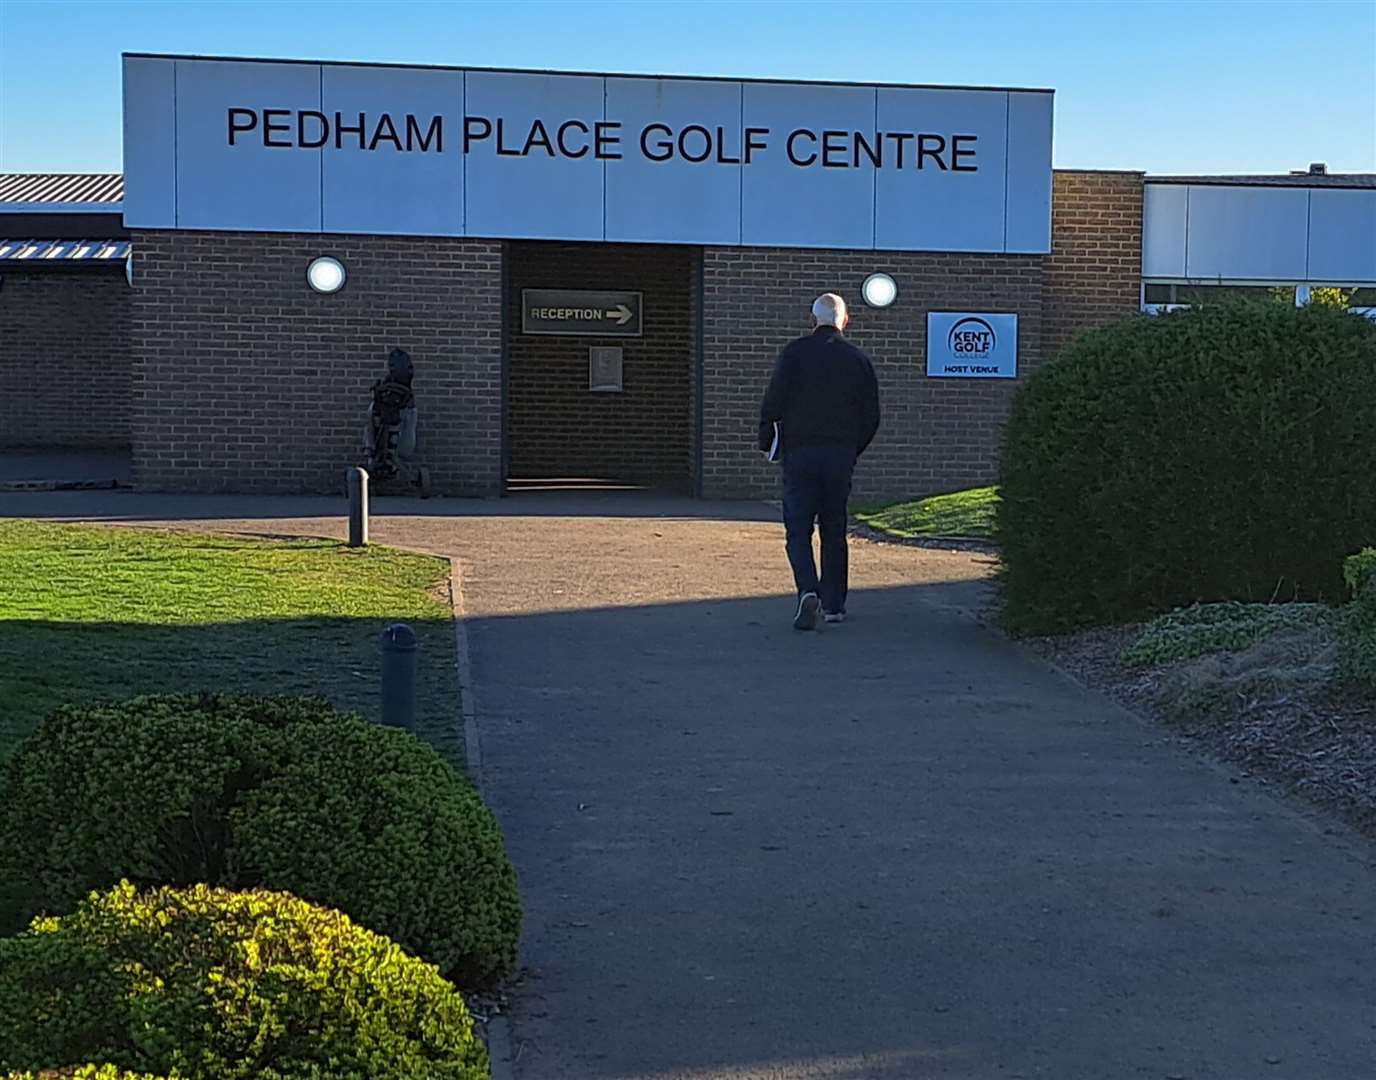 Pedham Place Golf Club might still be the Wasps' final destination